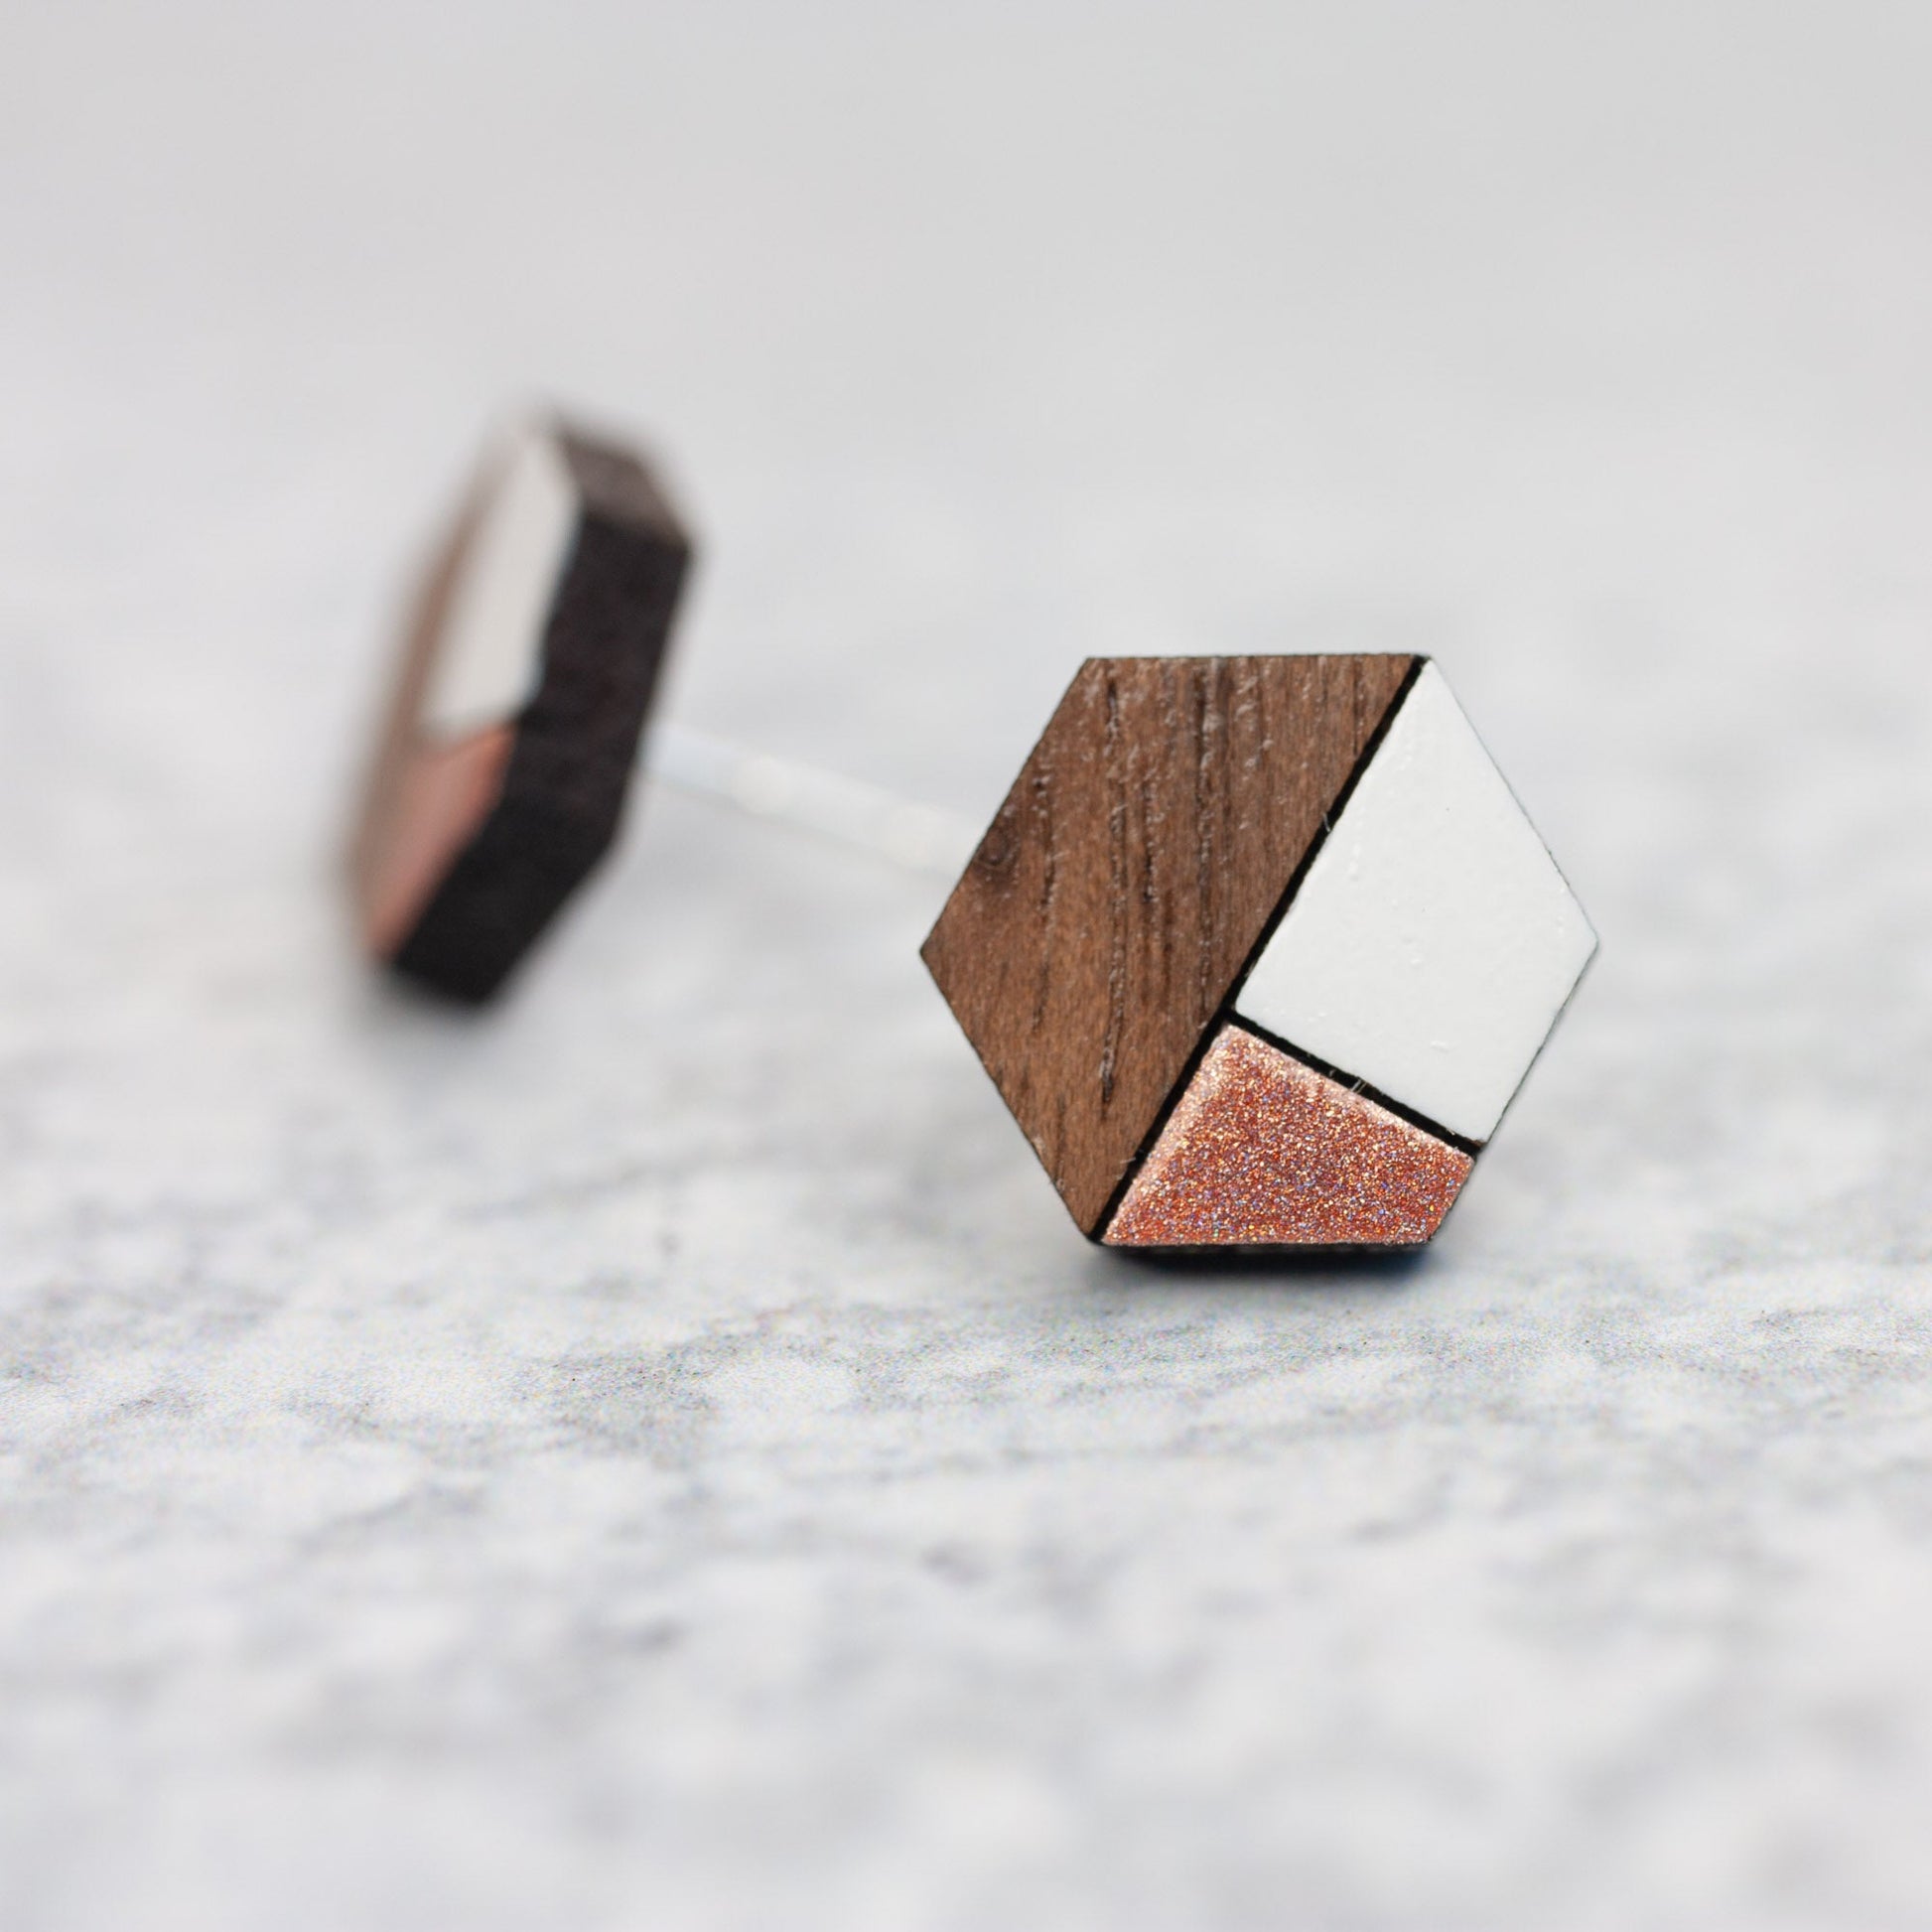 Wooden Laser Cut Earrings - Walnut with Rose Gold and White Bauhaus Hexagon - by LeeMo Designs in Bend, Oregon